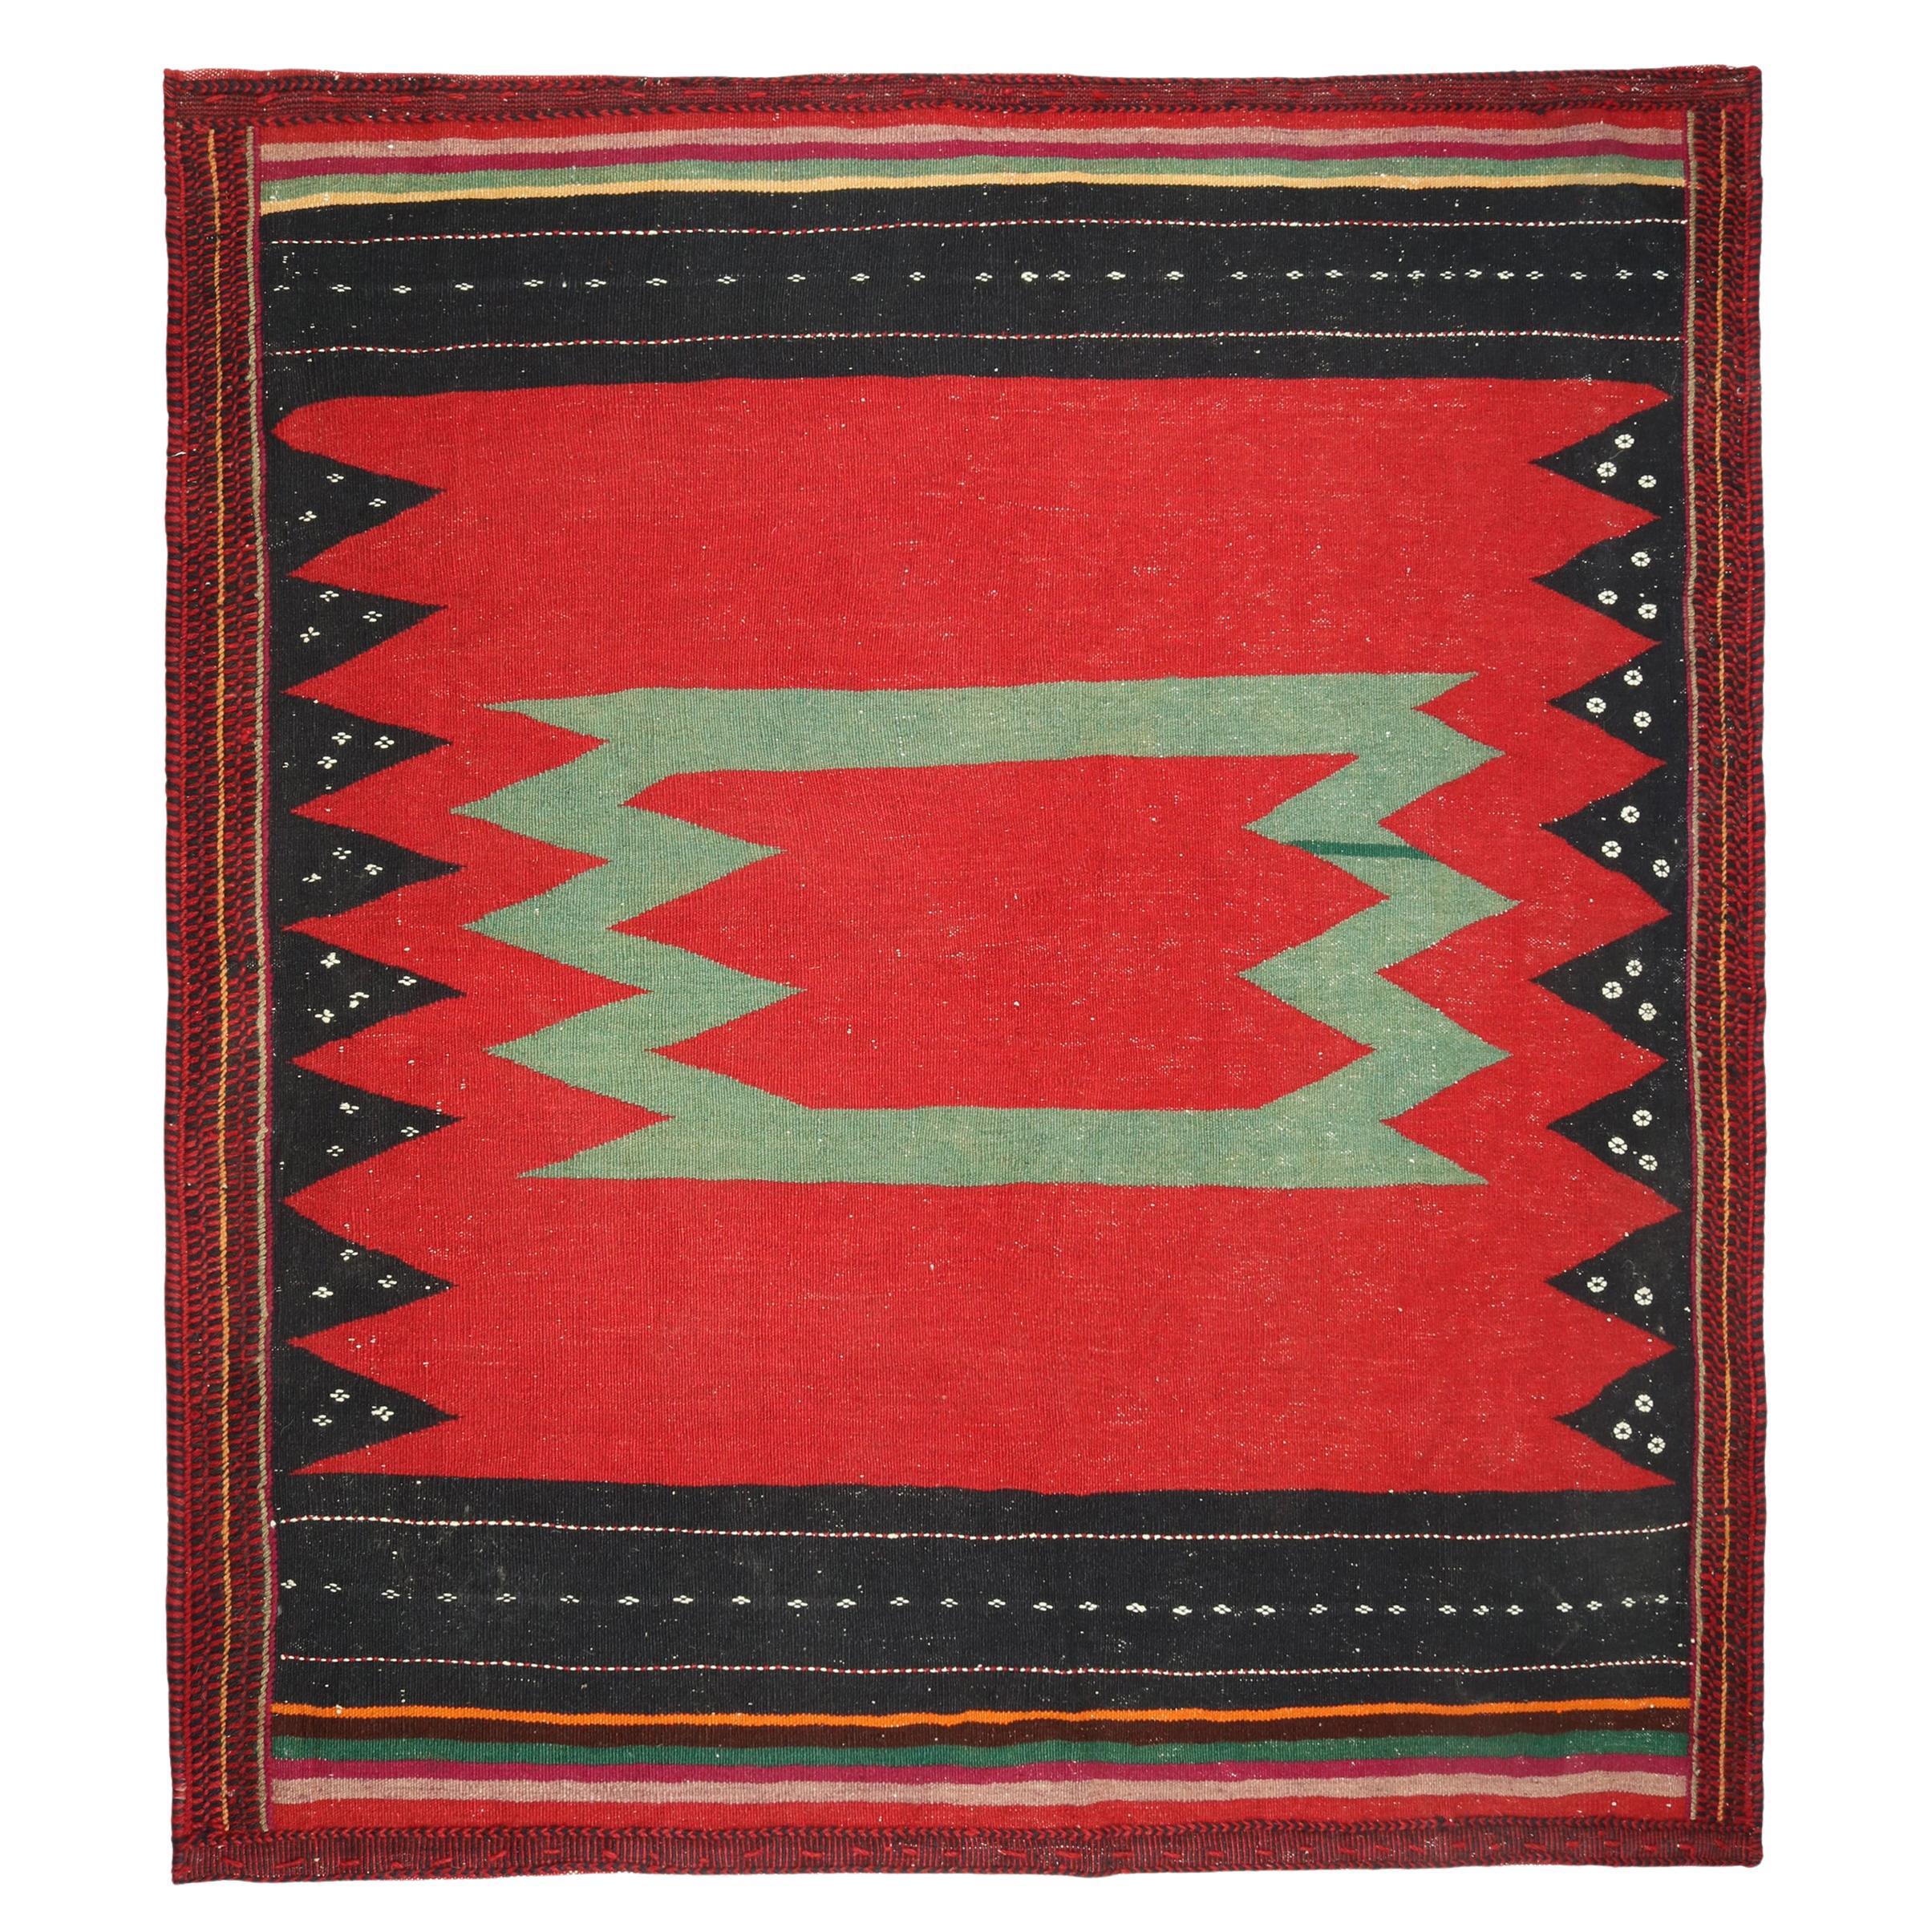 Vintage Sofreh Persian Kilim in Red with Teal and Black Pattern - by Rug & Kilim For Sale